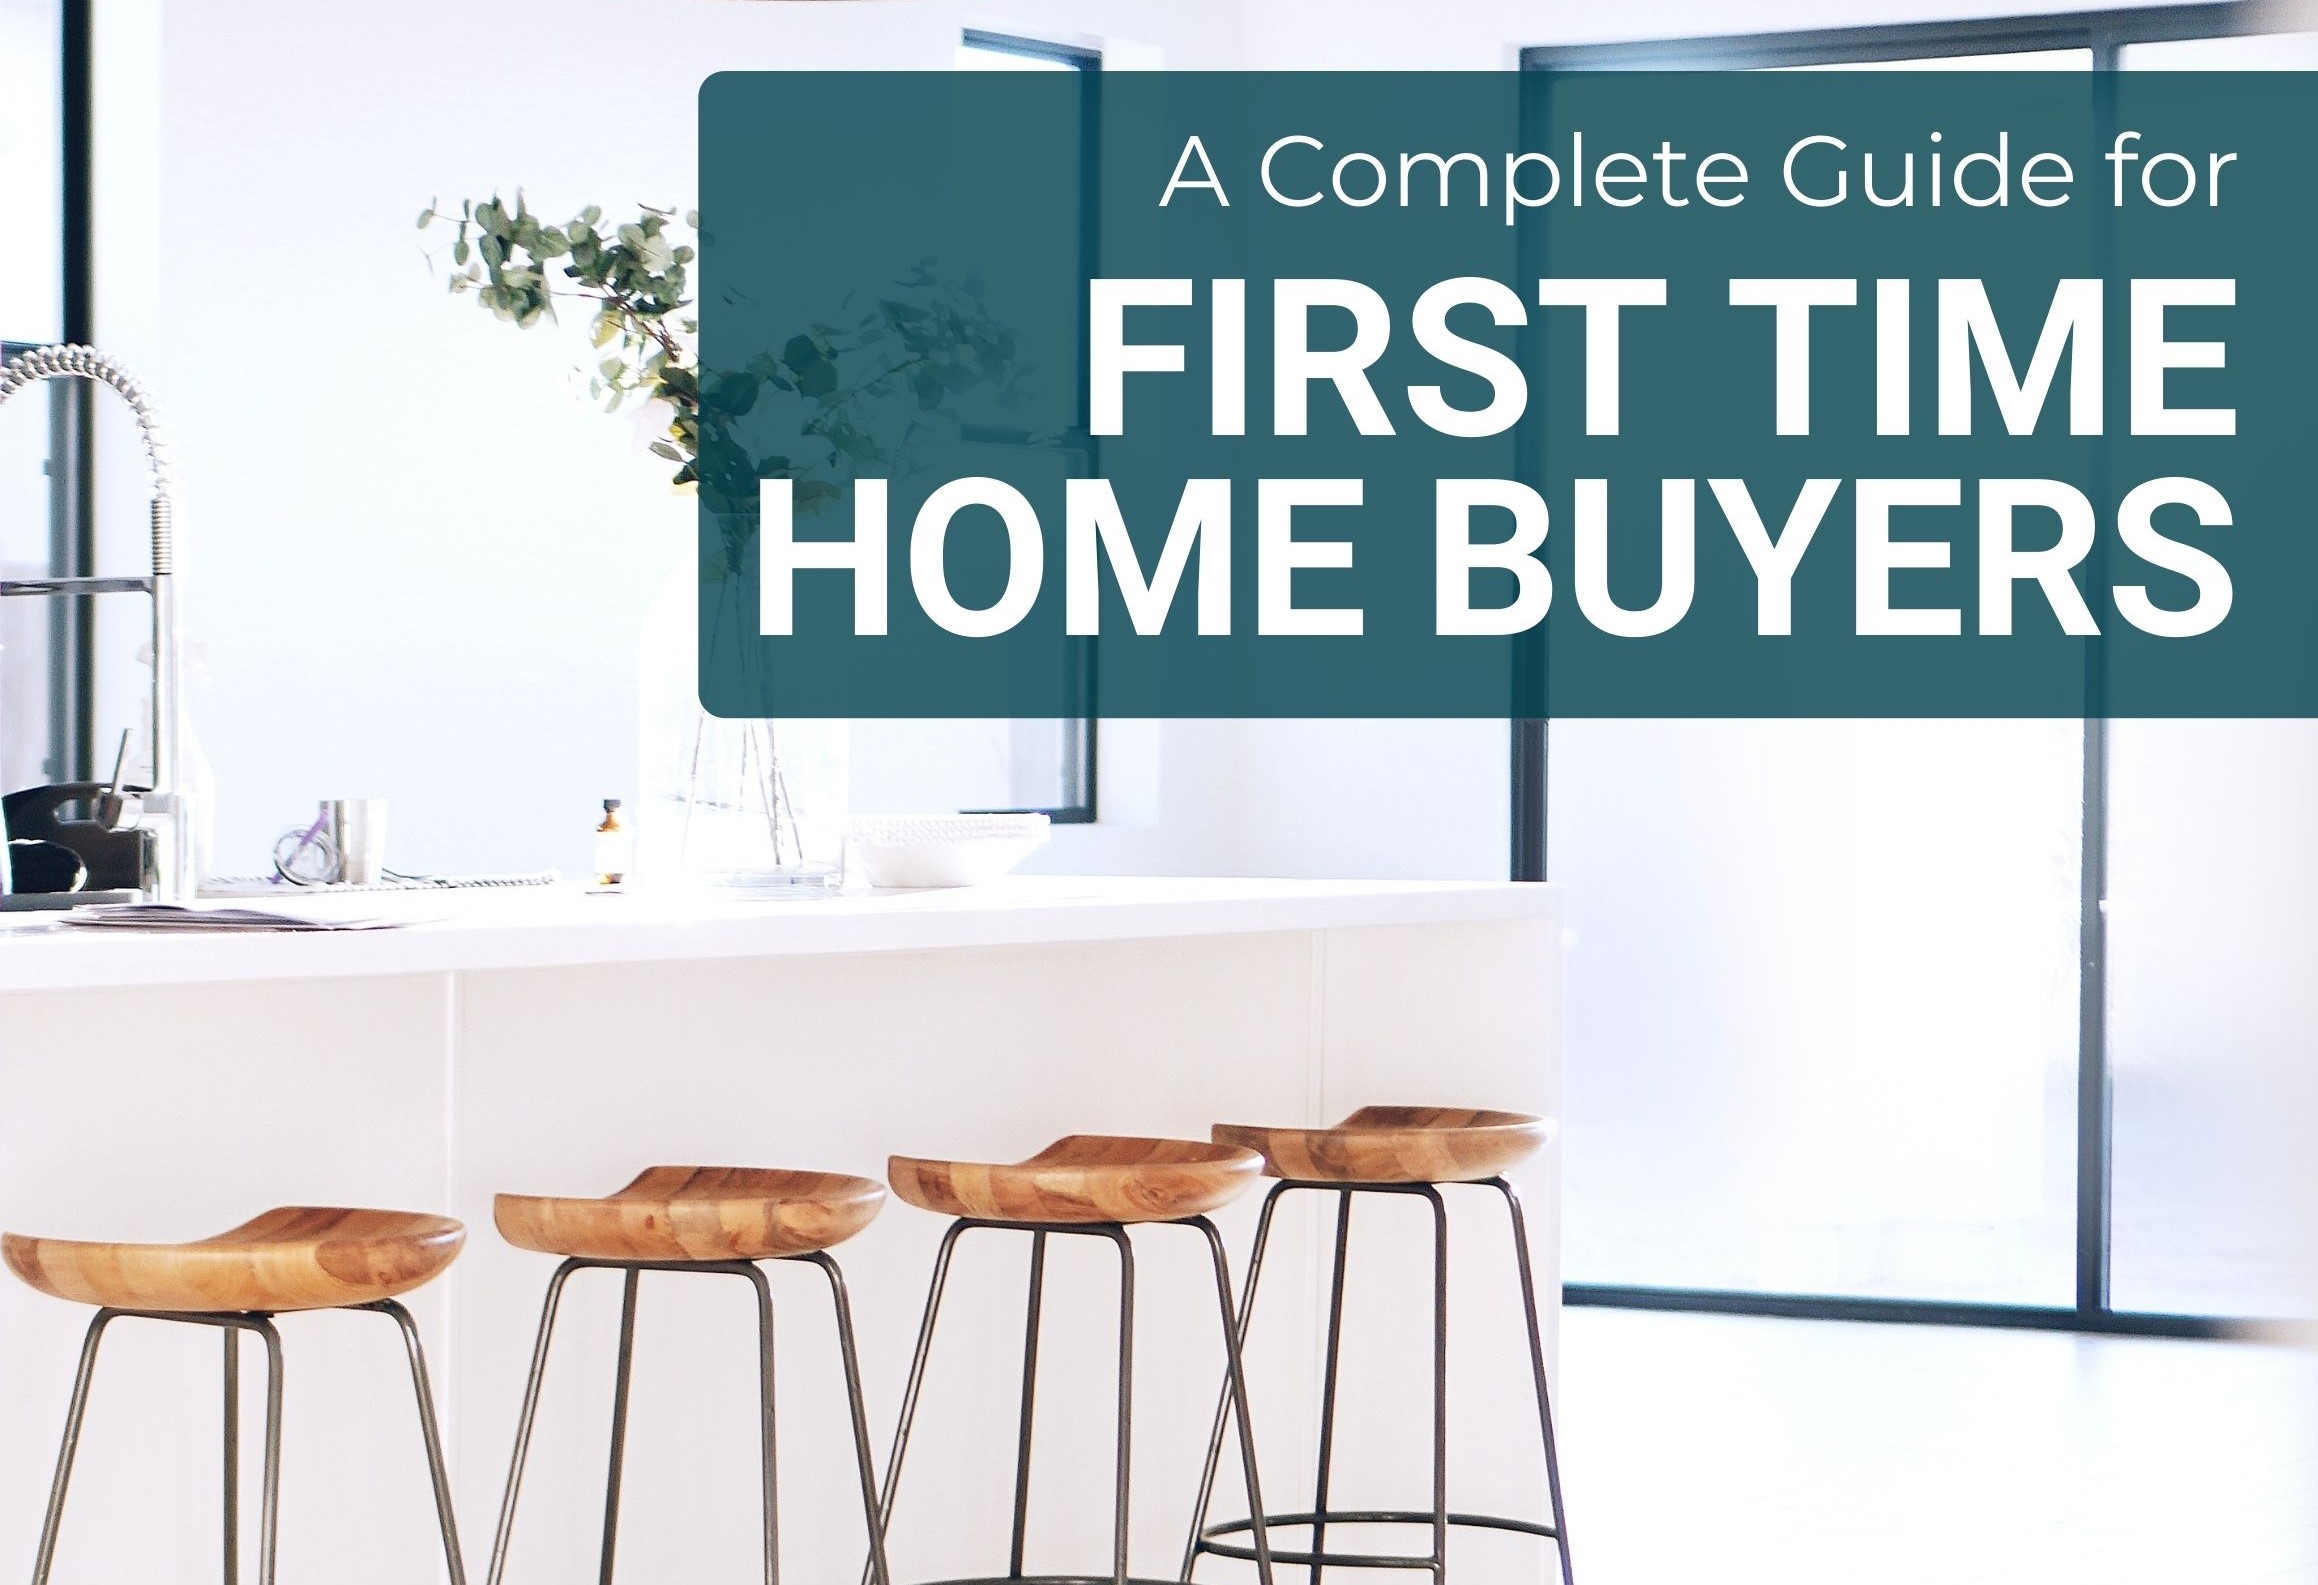 Home Buyers Guide2